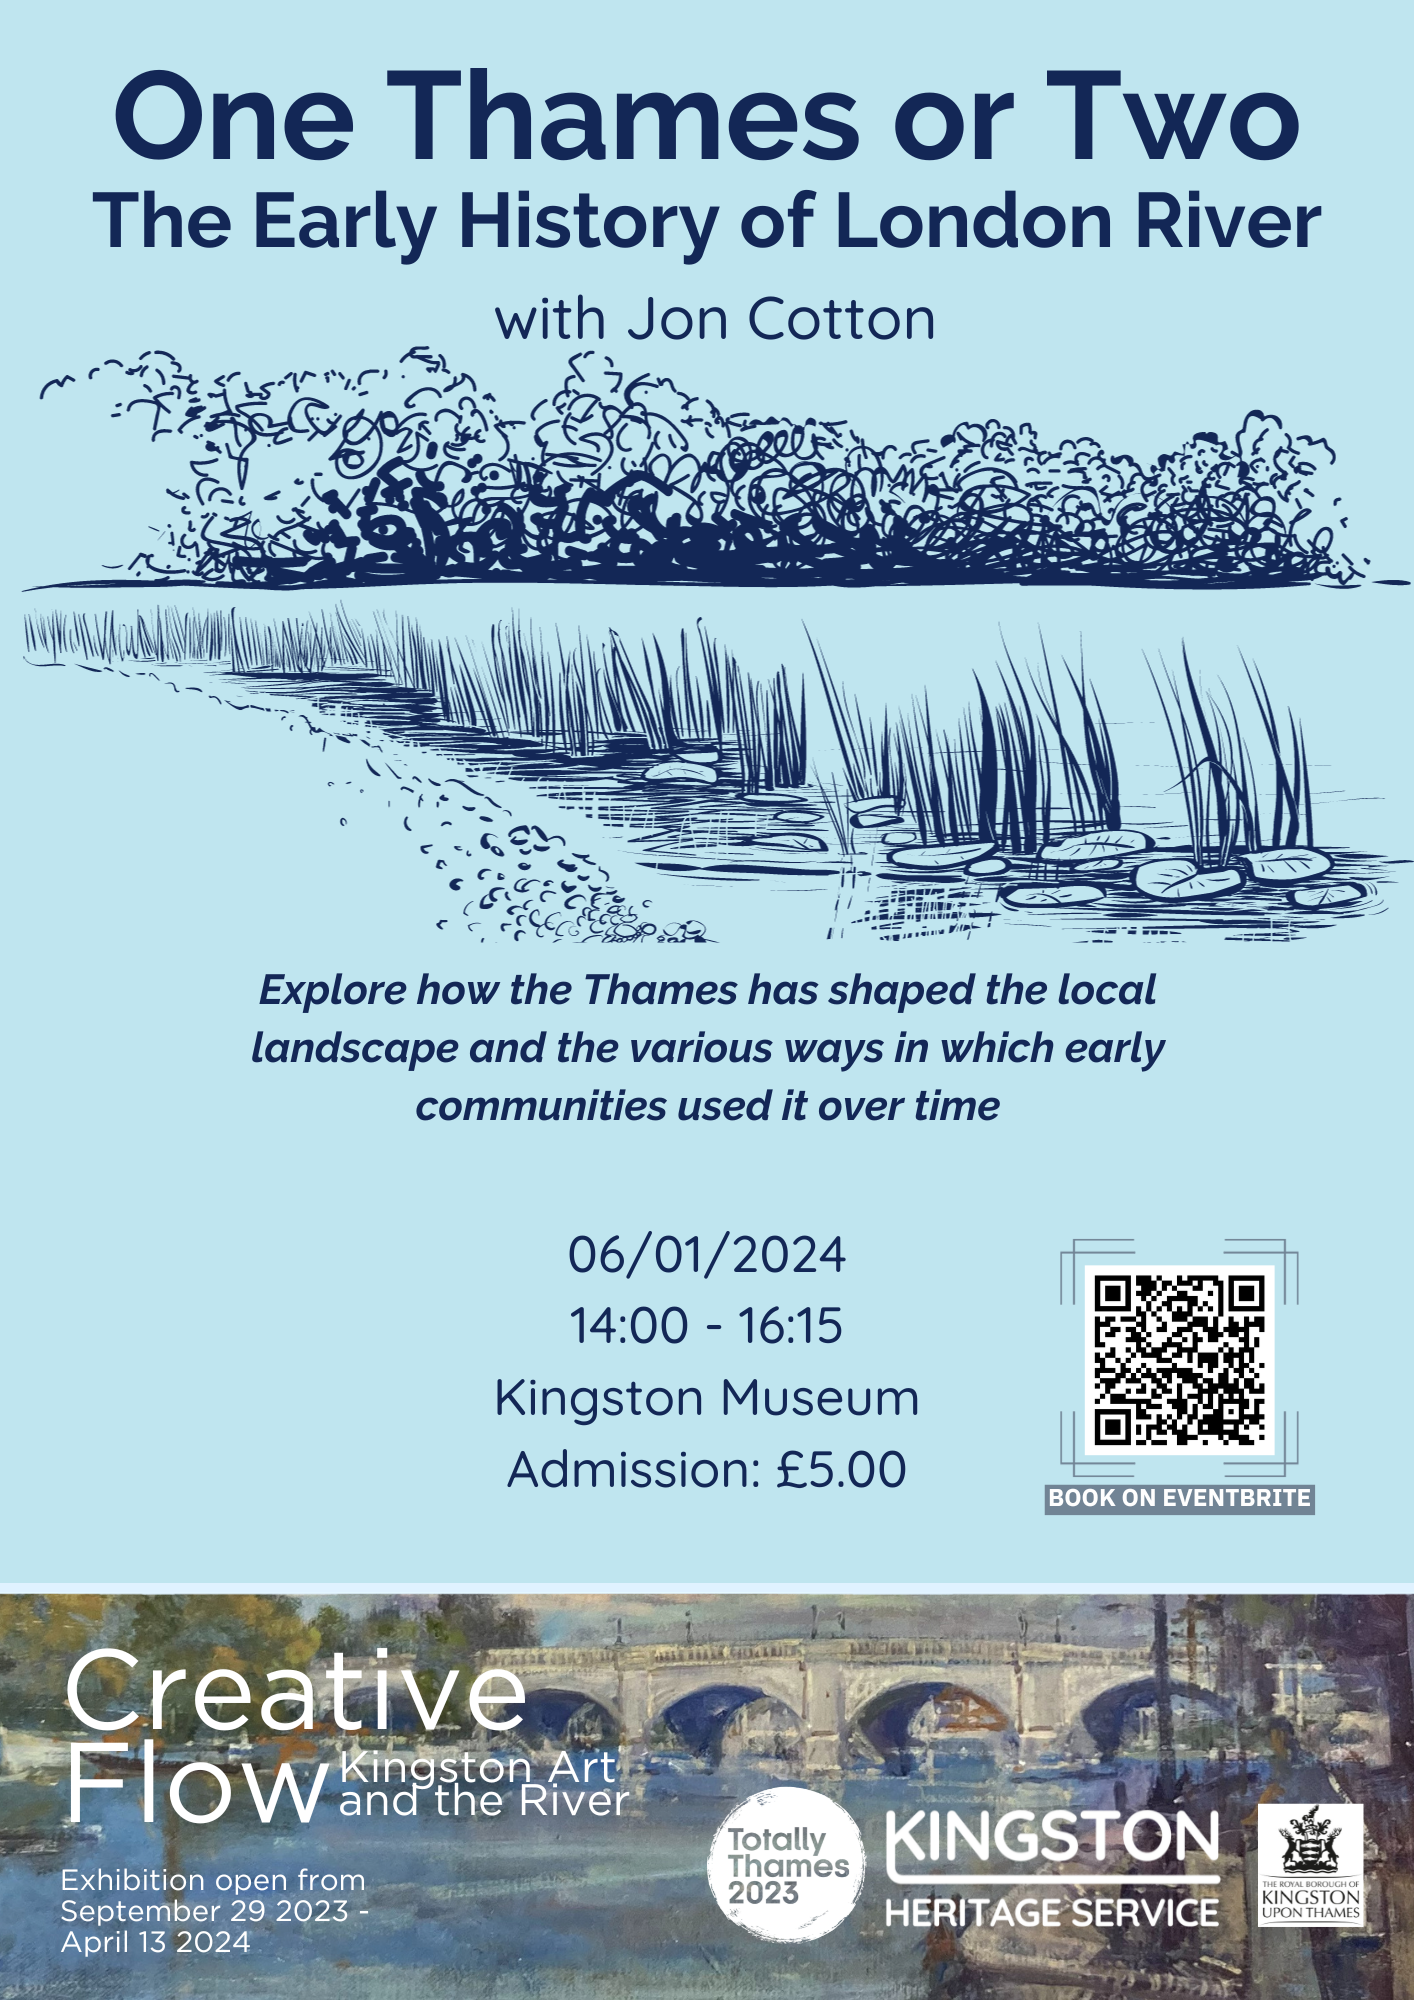 Jon Cotton - Early history of the river poster